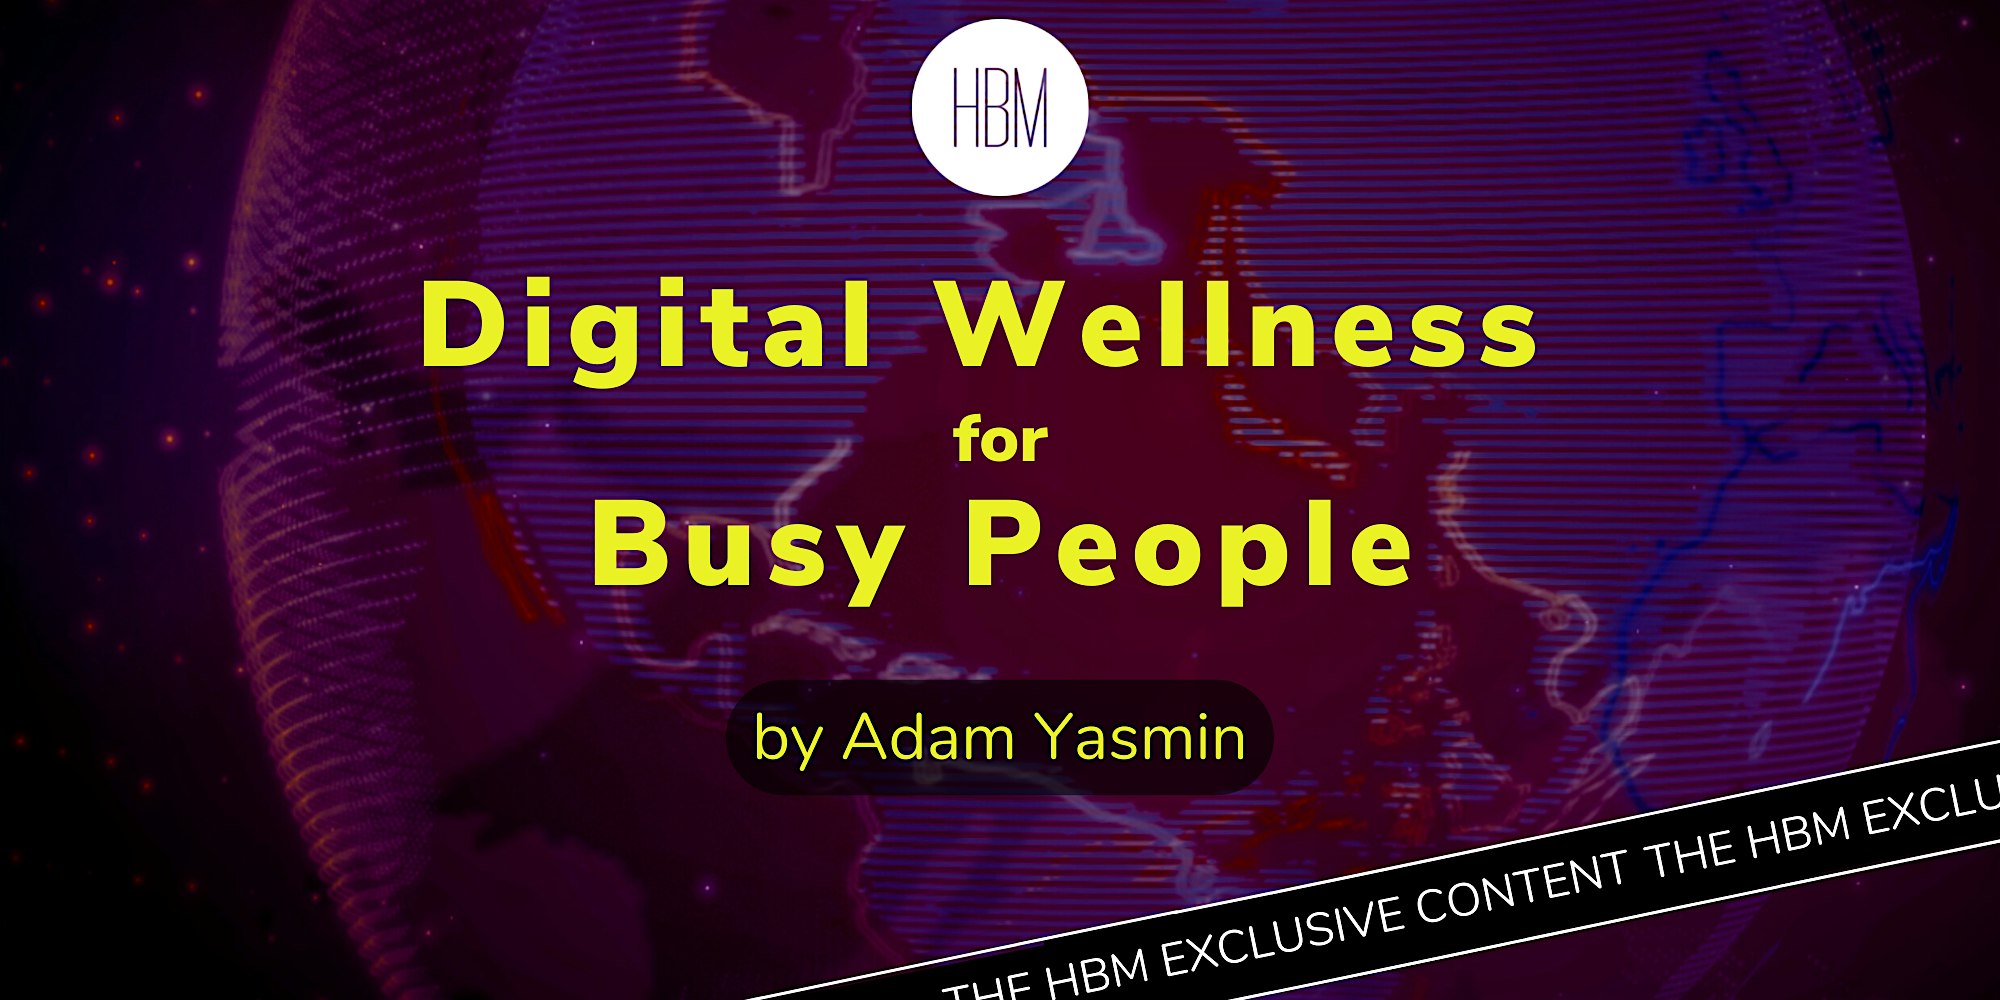 Digital Wellness for Busy People